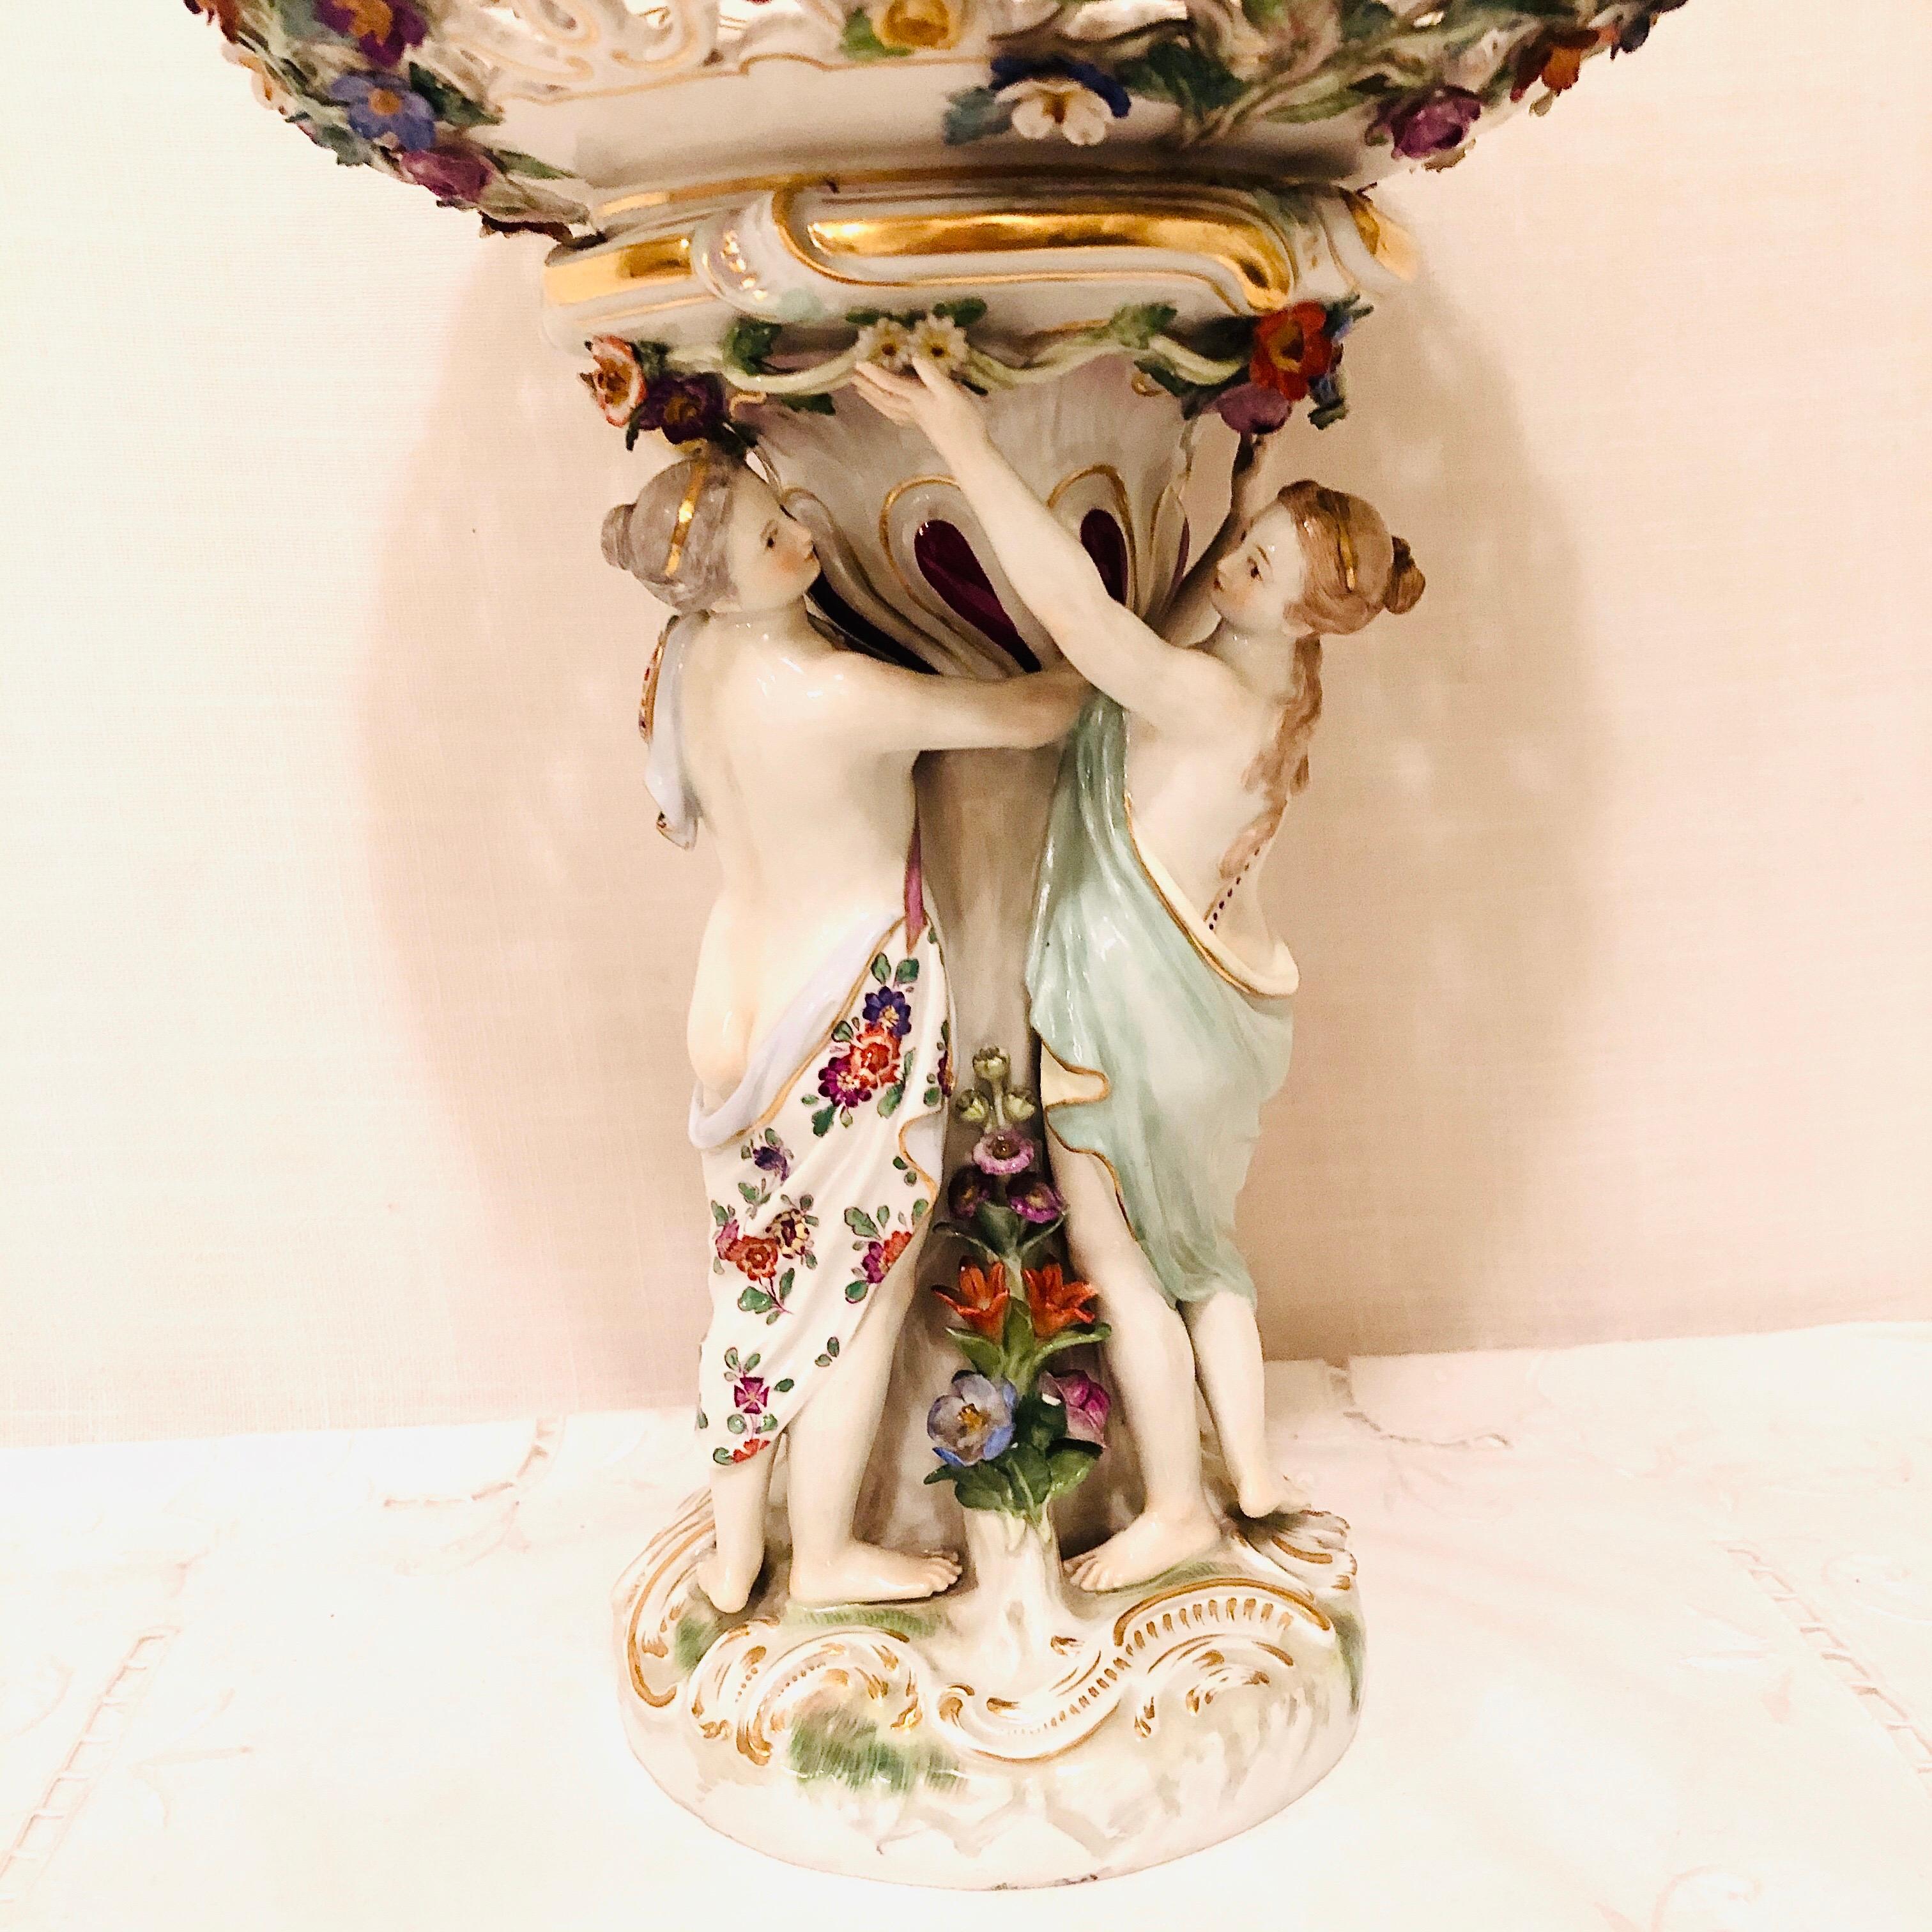 Late 19th Century Meissen Centerpiece Depicting the Three Charities or Graces Dancing in a Circle